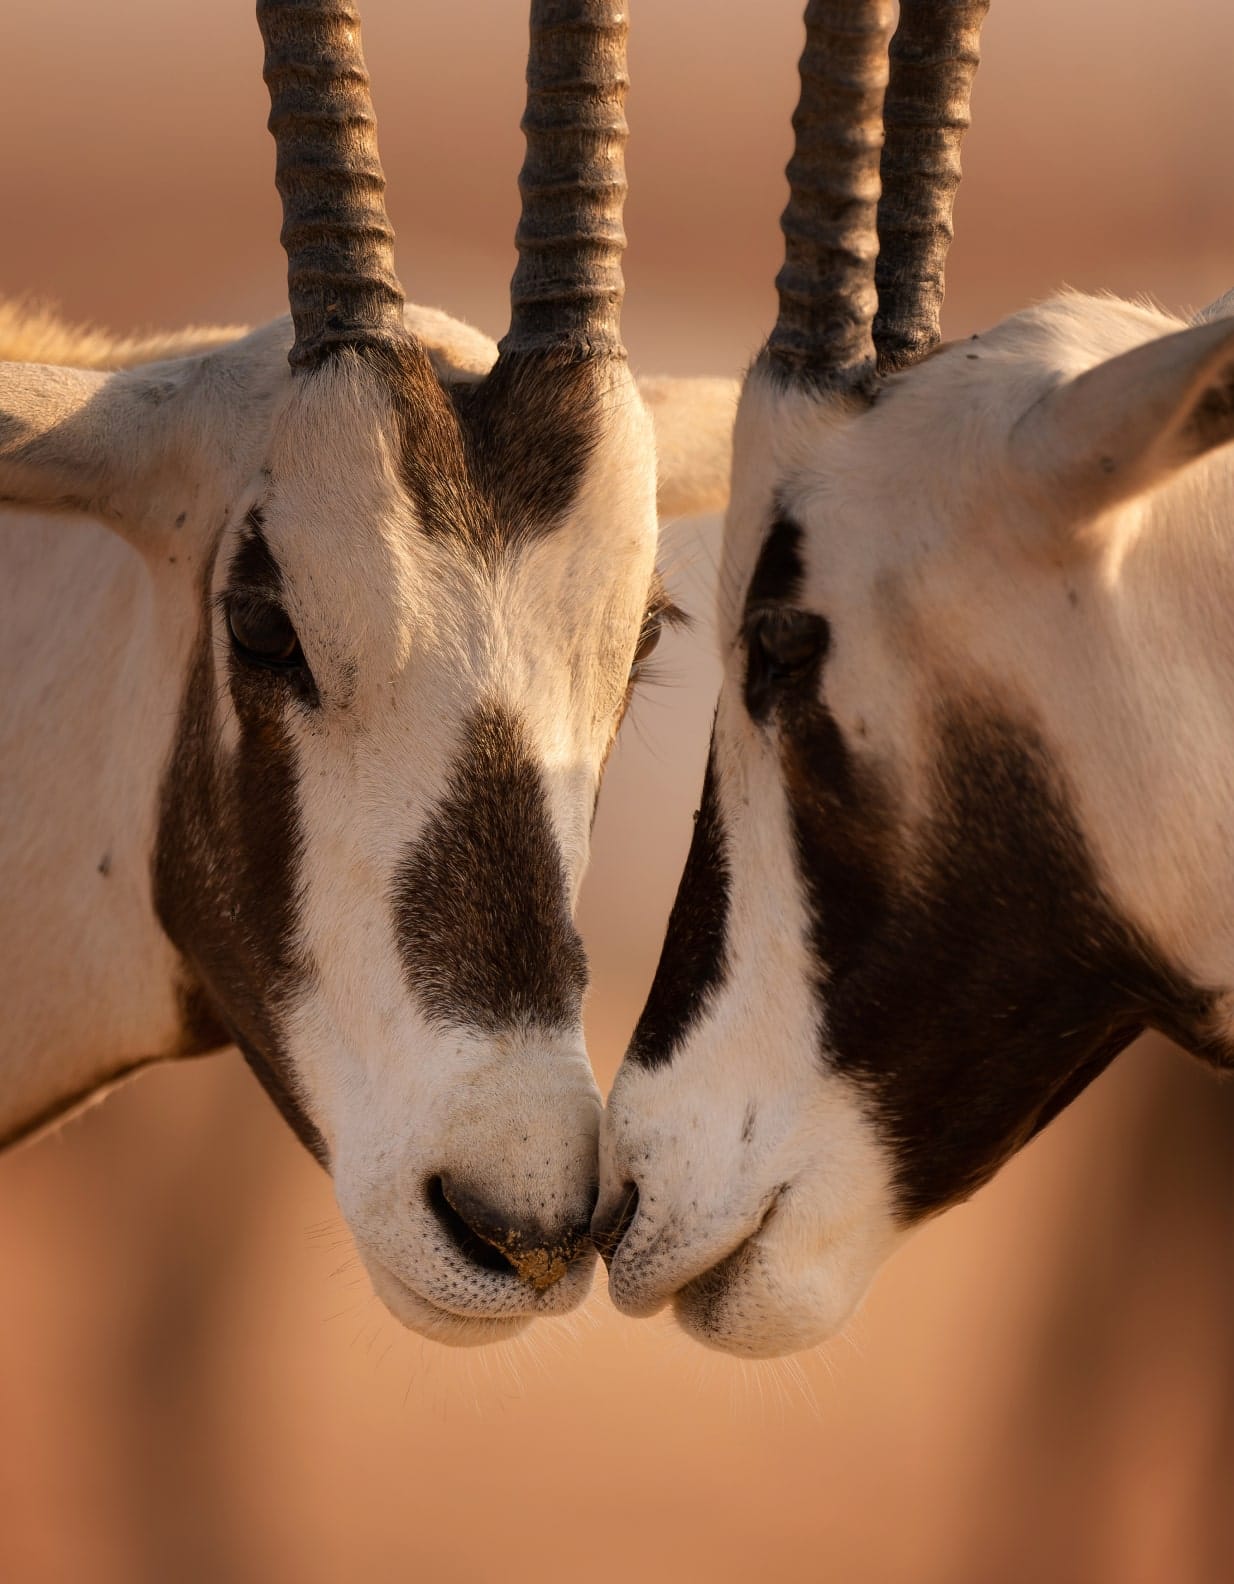 Arabian oryx are a protected species by the UAE government